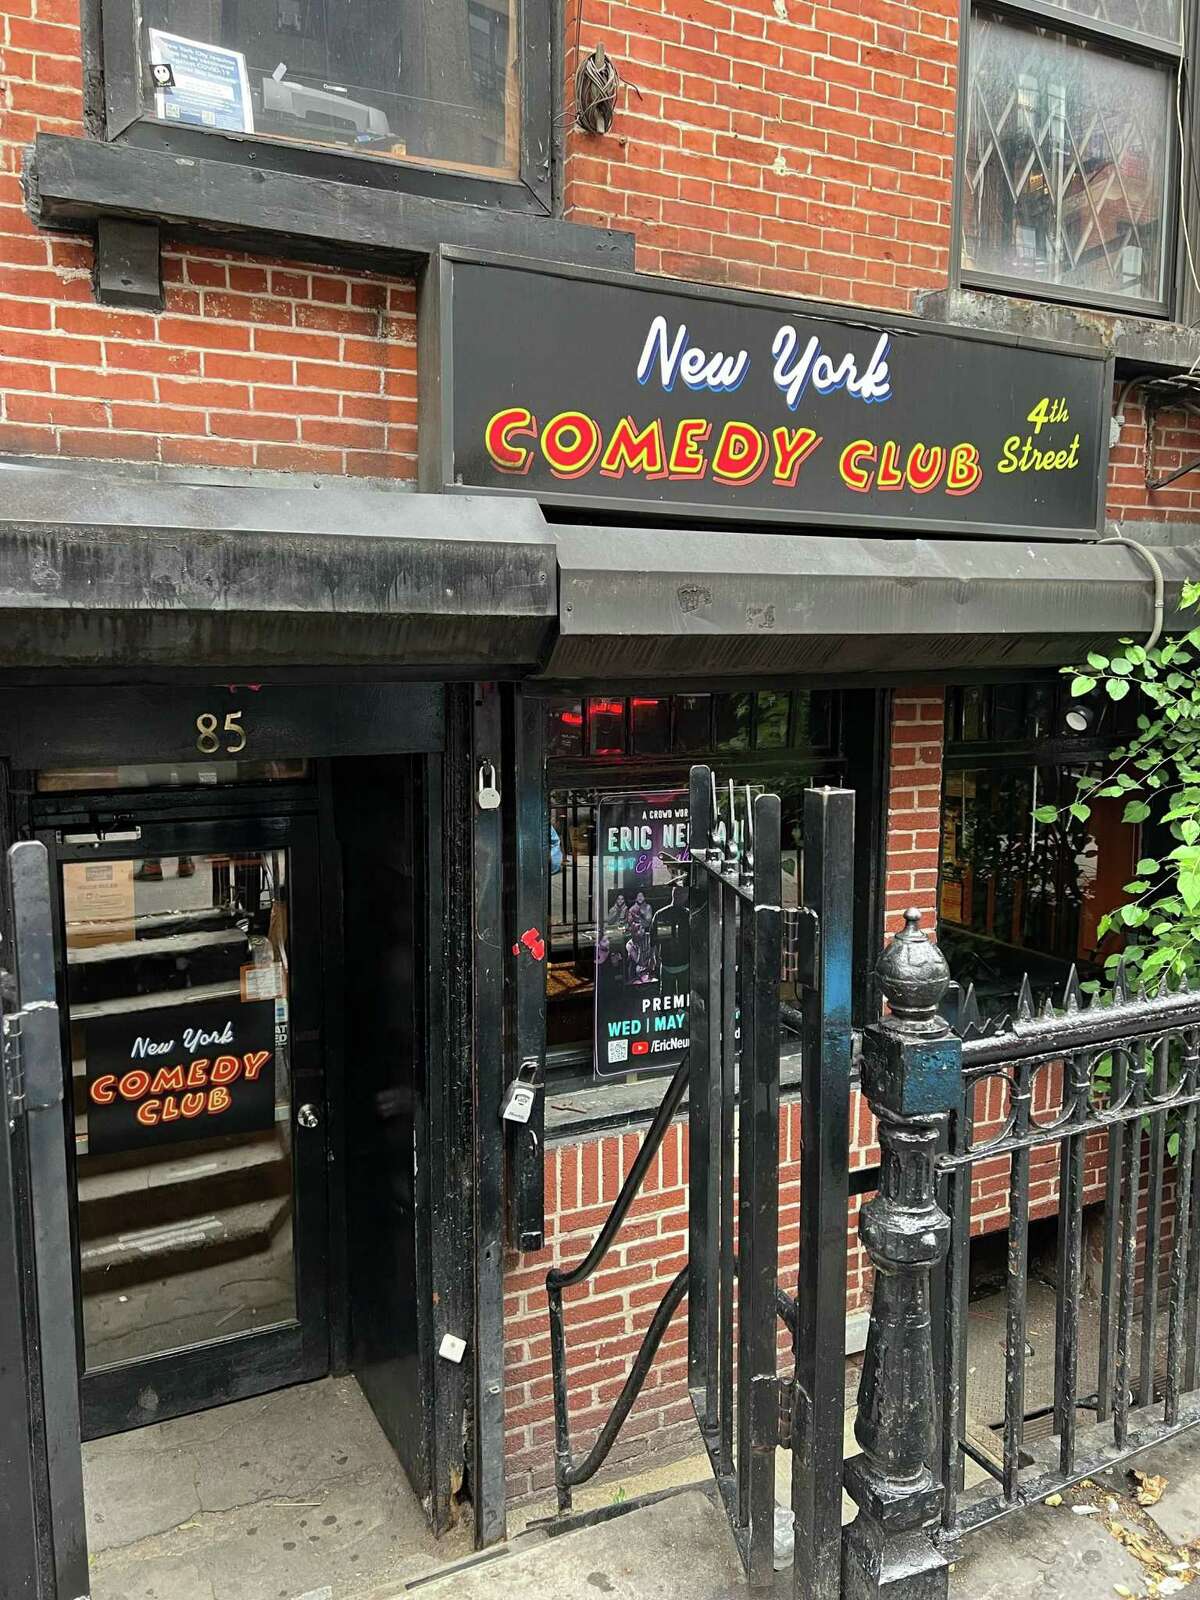 New York Comedy Club, which is planning to open a club at Stamford Town Center has two clubs in Manhattan, including this one at 85 E. 4th St., in the East Village.